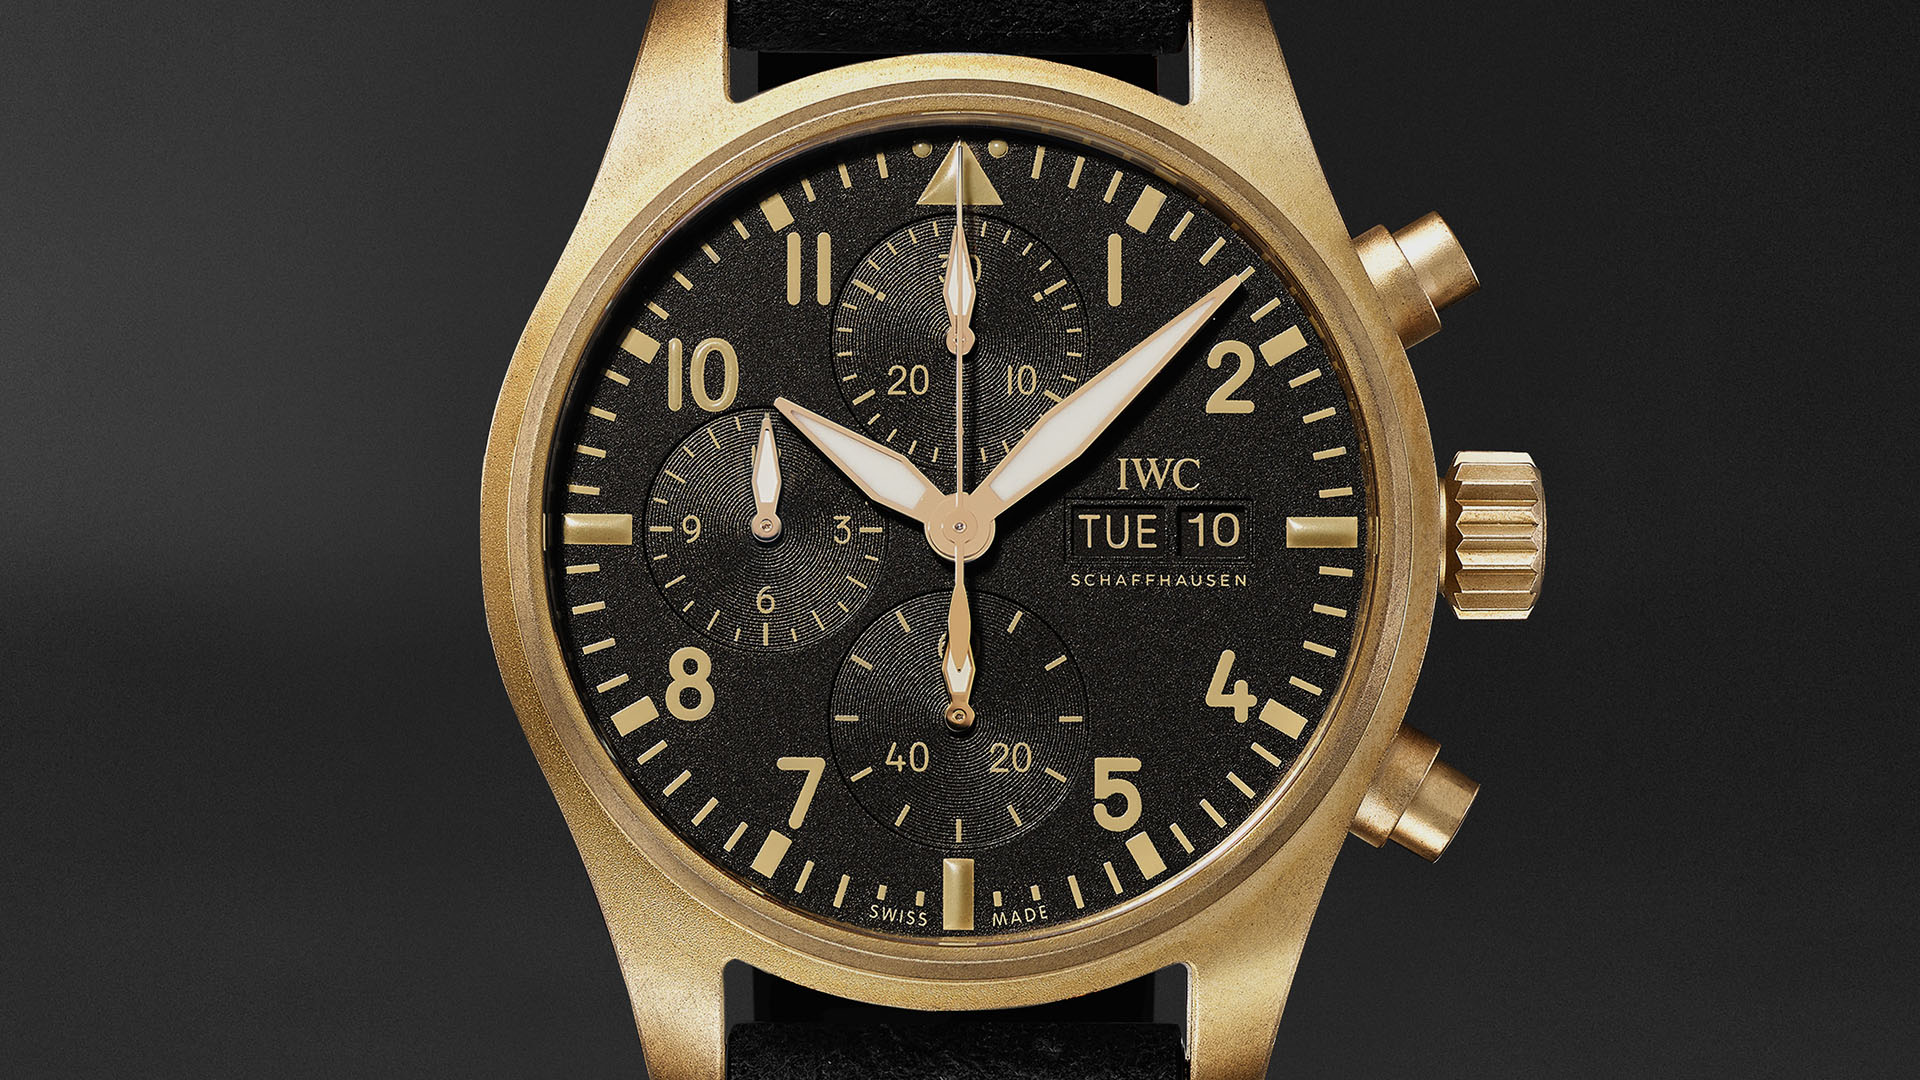 IWC Unveils ?10 Years Of MR PORTER? Limited Edition Pilot?s Chronograph Watch